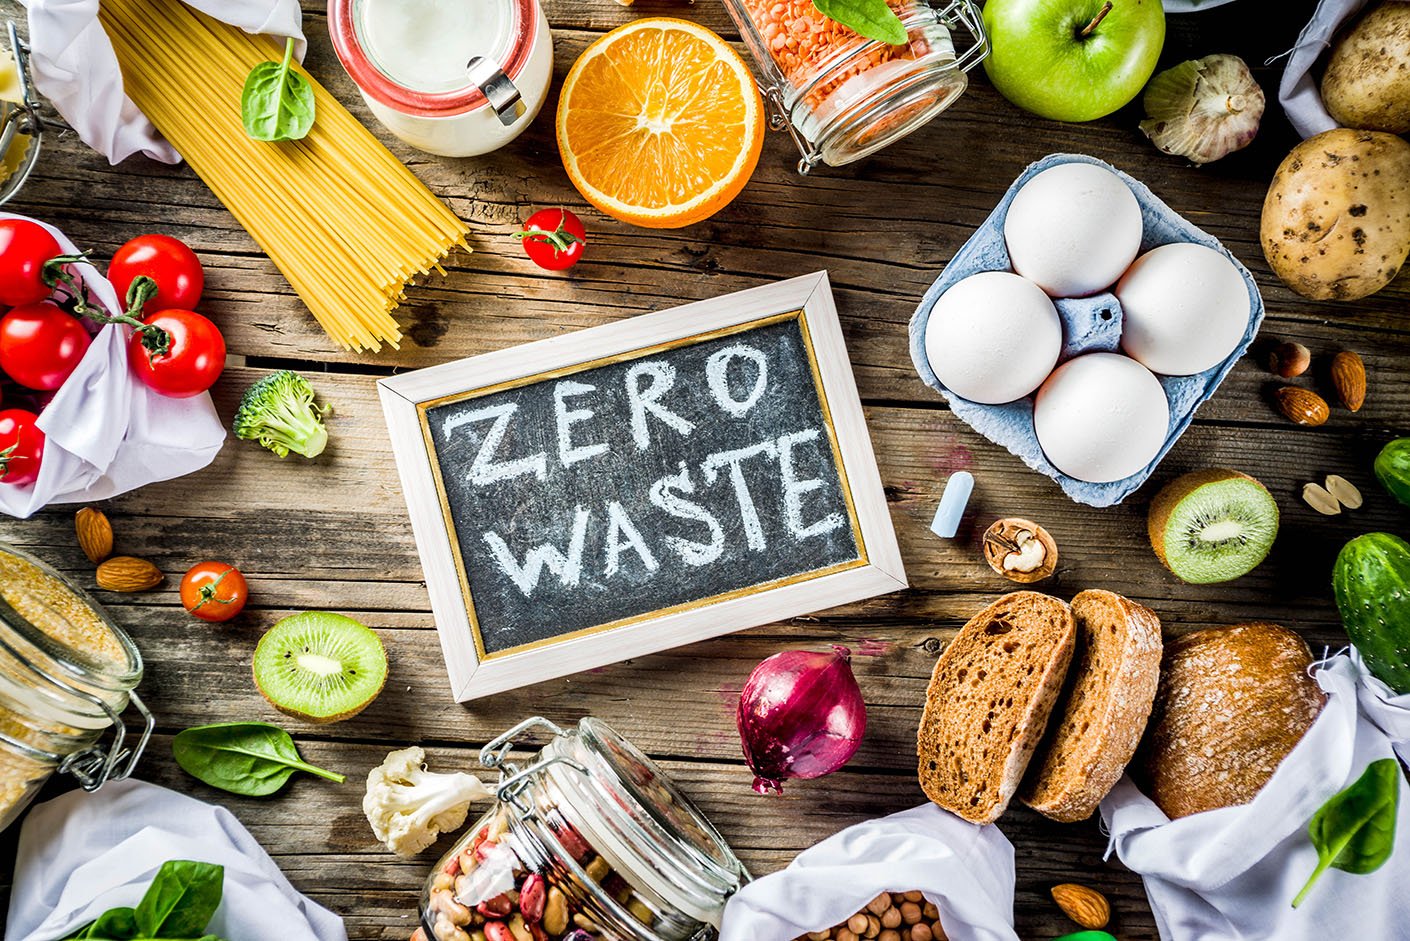 Food waste management innovations in the foodservice industry